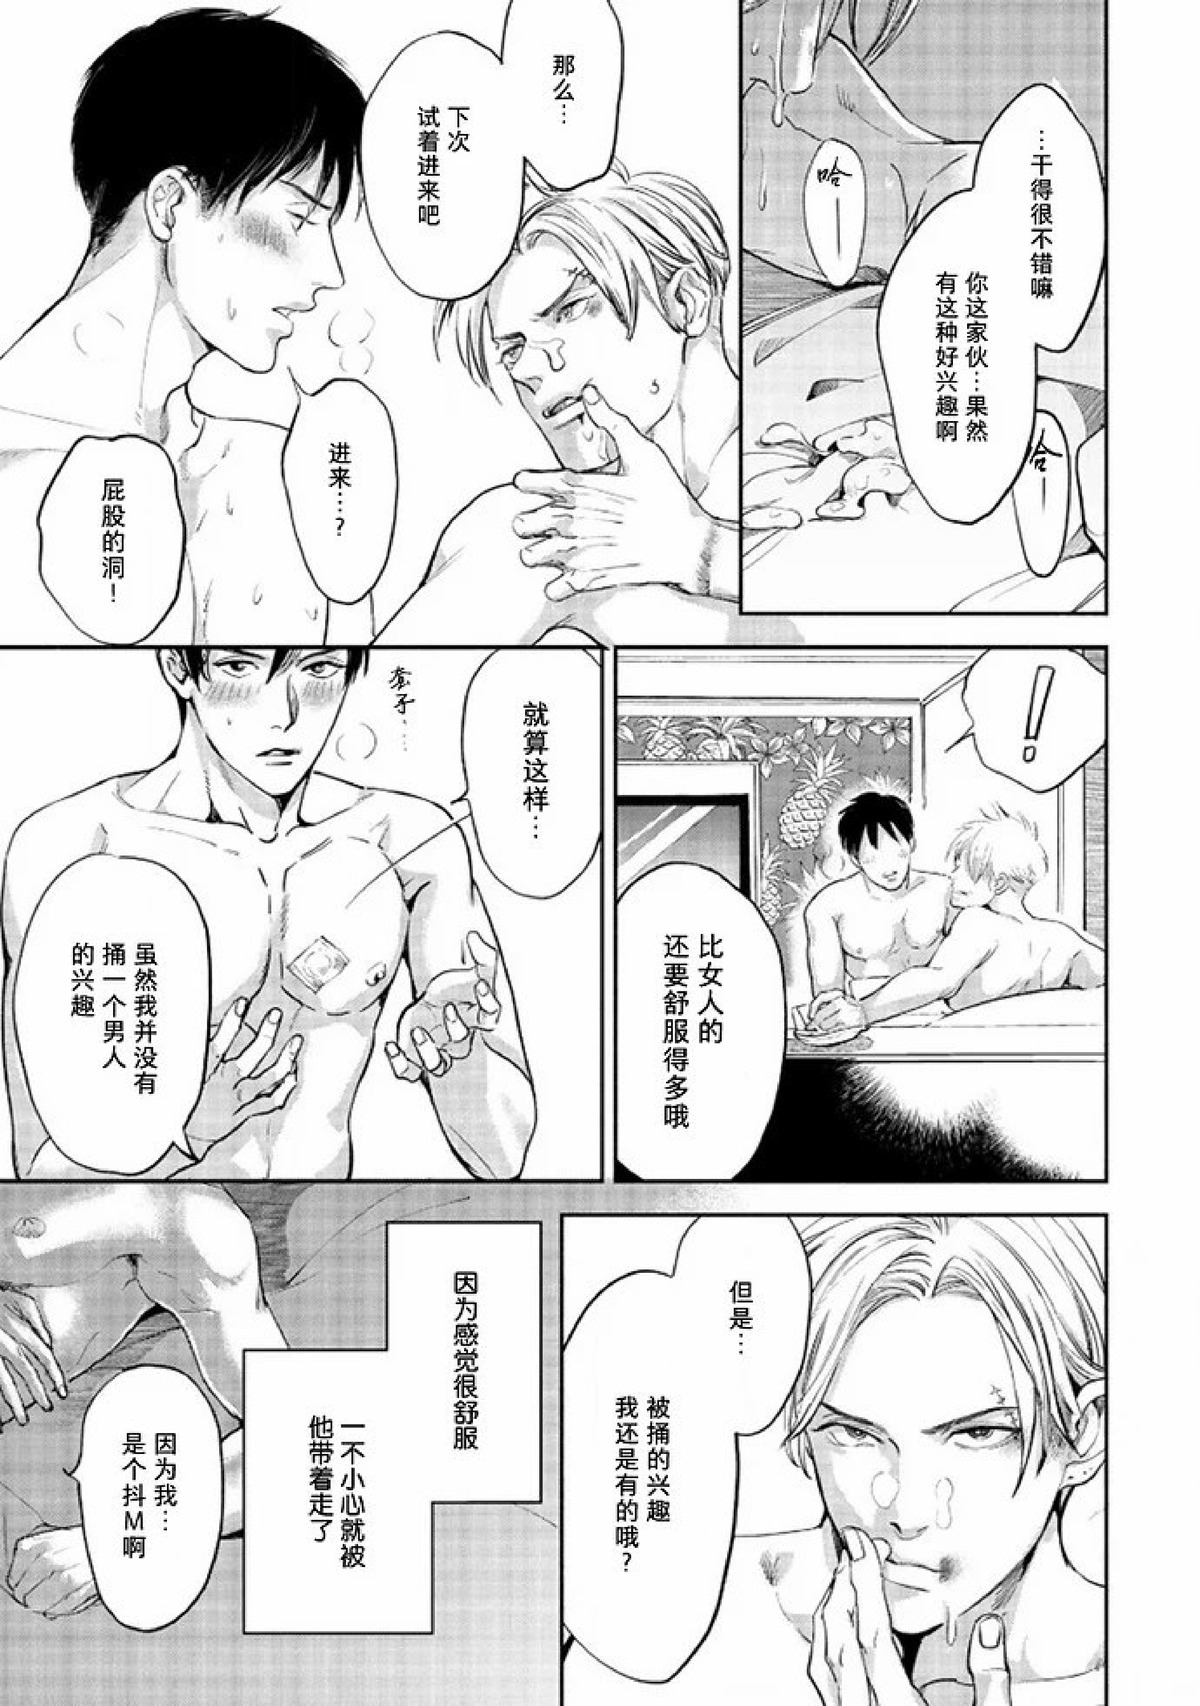 【Two sides of the same coin[耽美]】漫画-（上卷01-02）章节漫画下拉式图片-97.jpg